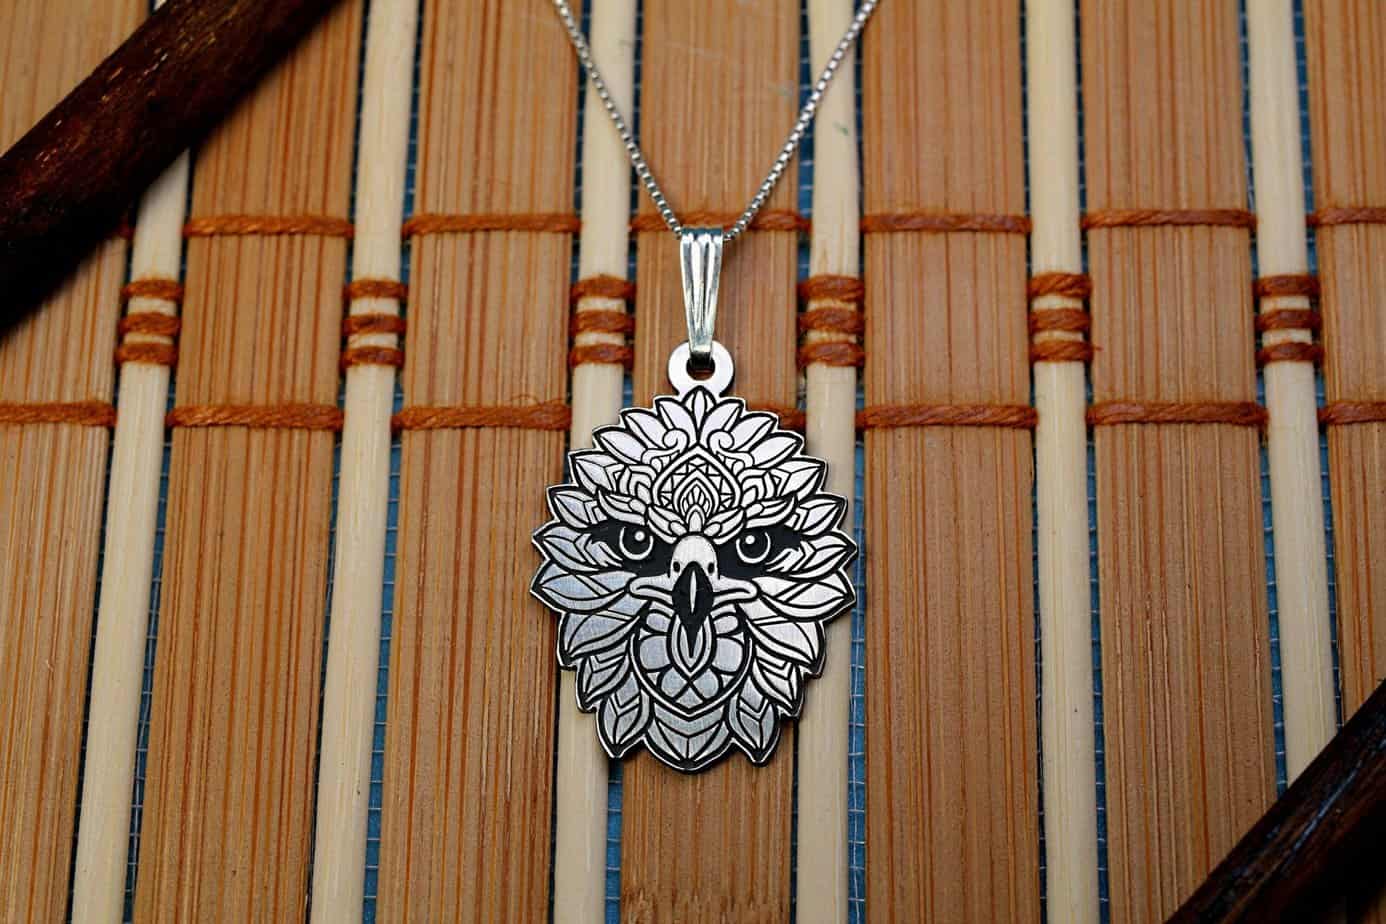 Silver Bald Eagle Necklace, Hawk Pendant, Animal Jewelry, Falcon Necklace, Birthday Gift, Bird Animal Accessory Men’s Silver Jewelry Gifts